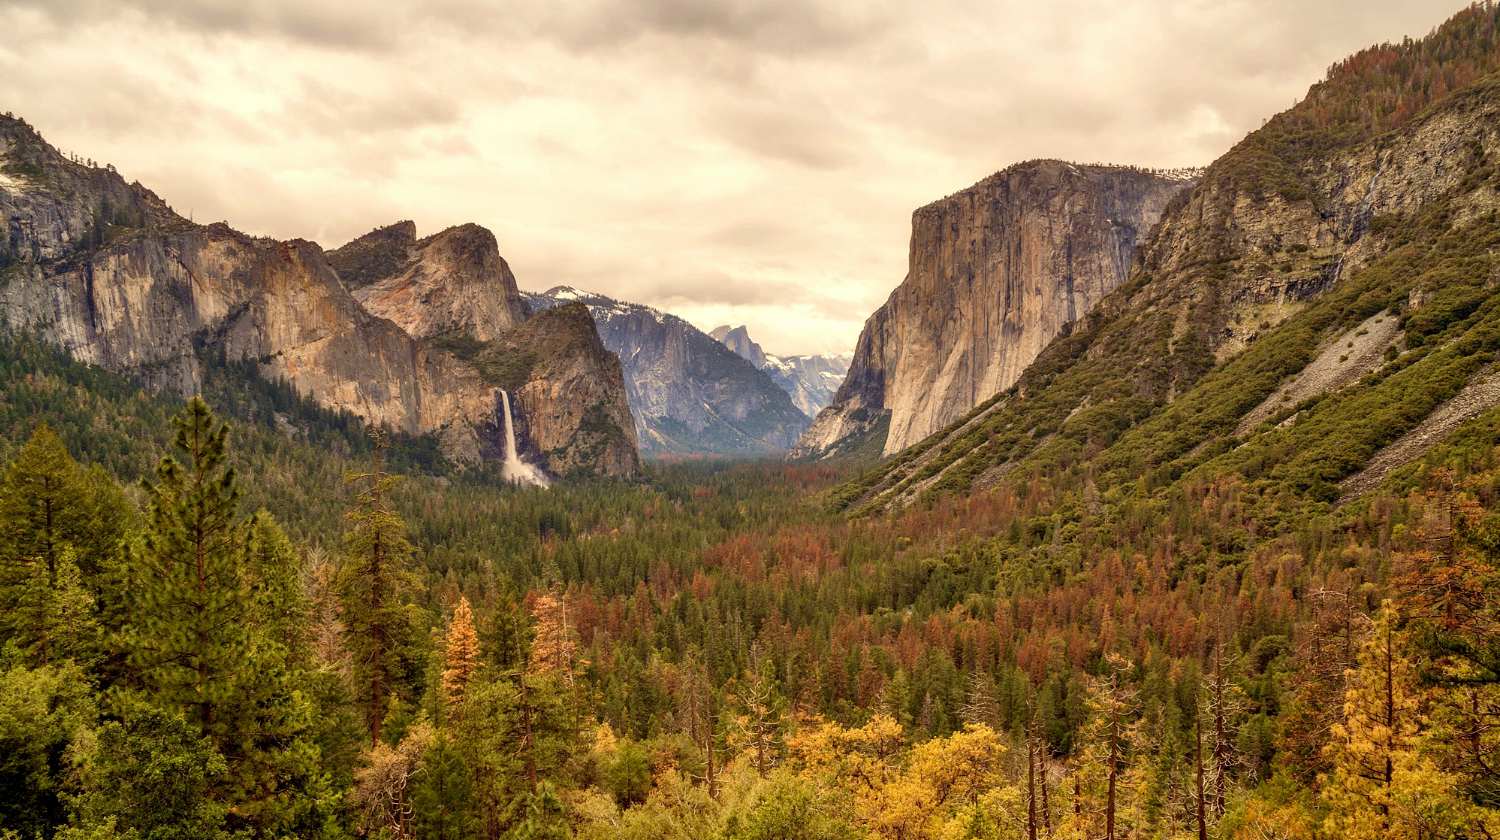 Feature | Yosemite mountain and green landscape | Yosemite National Park Camping | Survival Life National Park Series